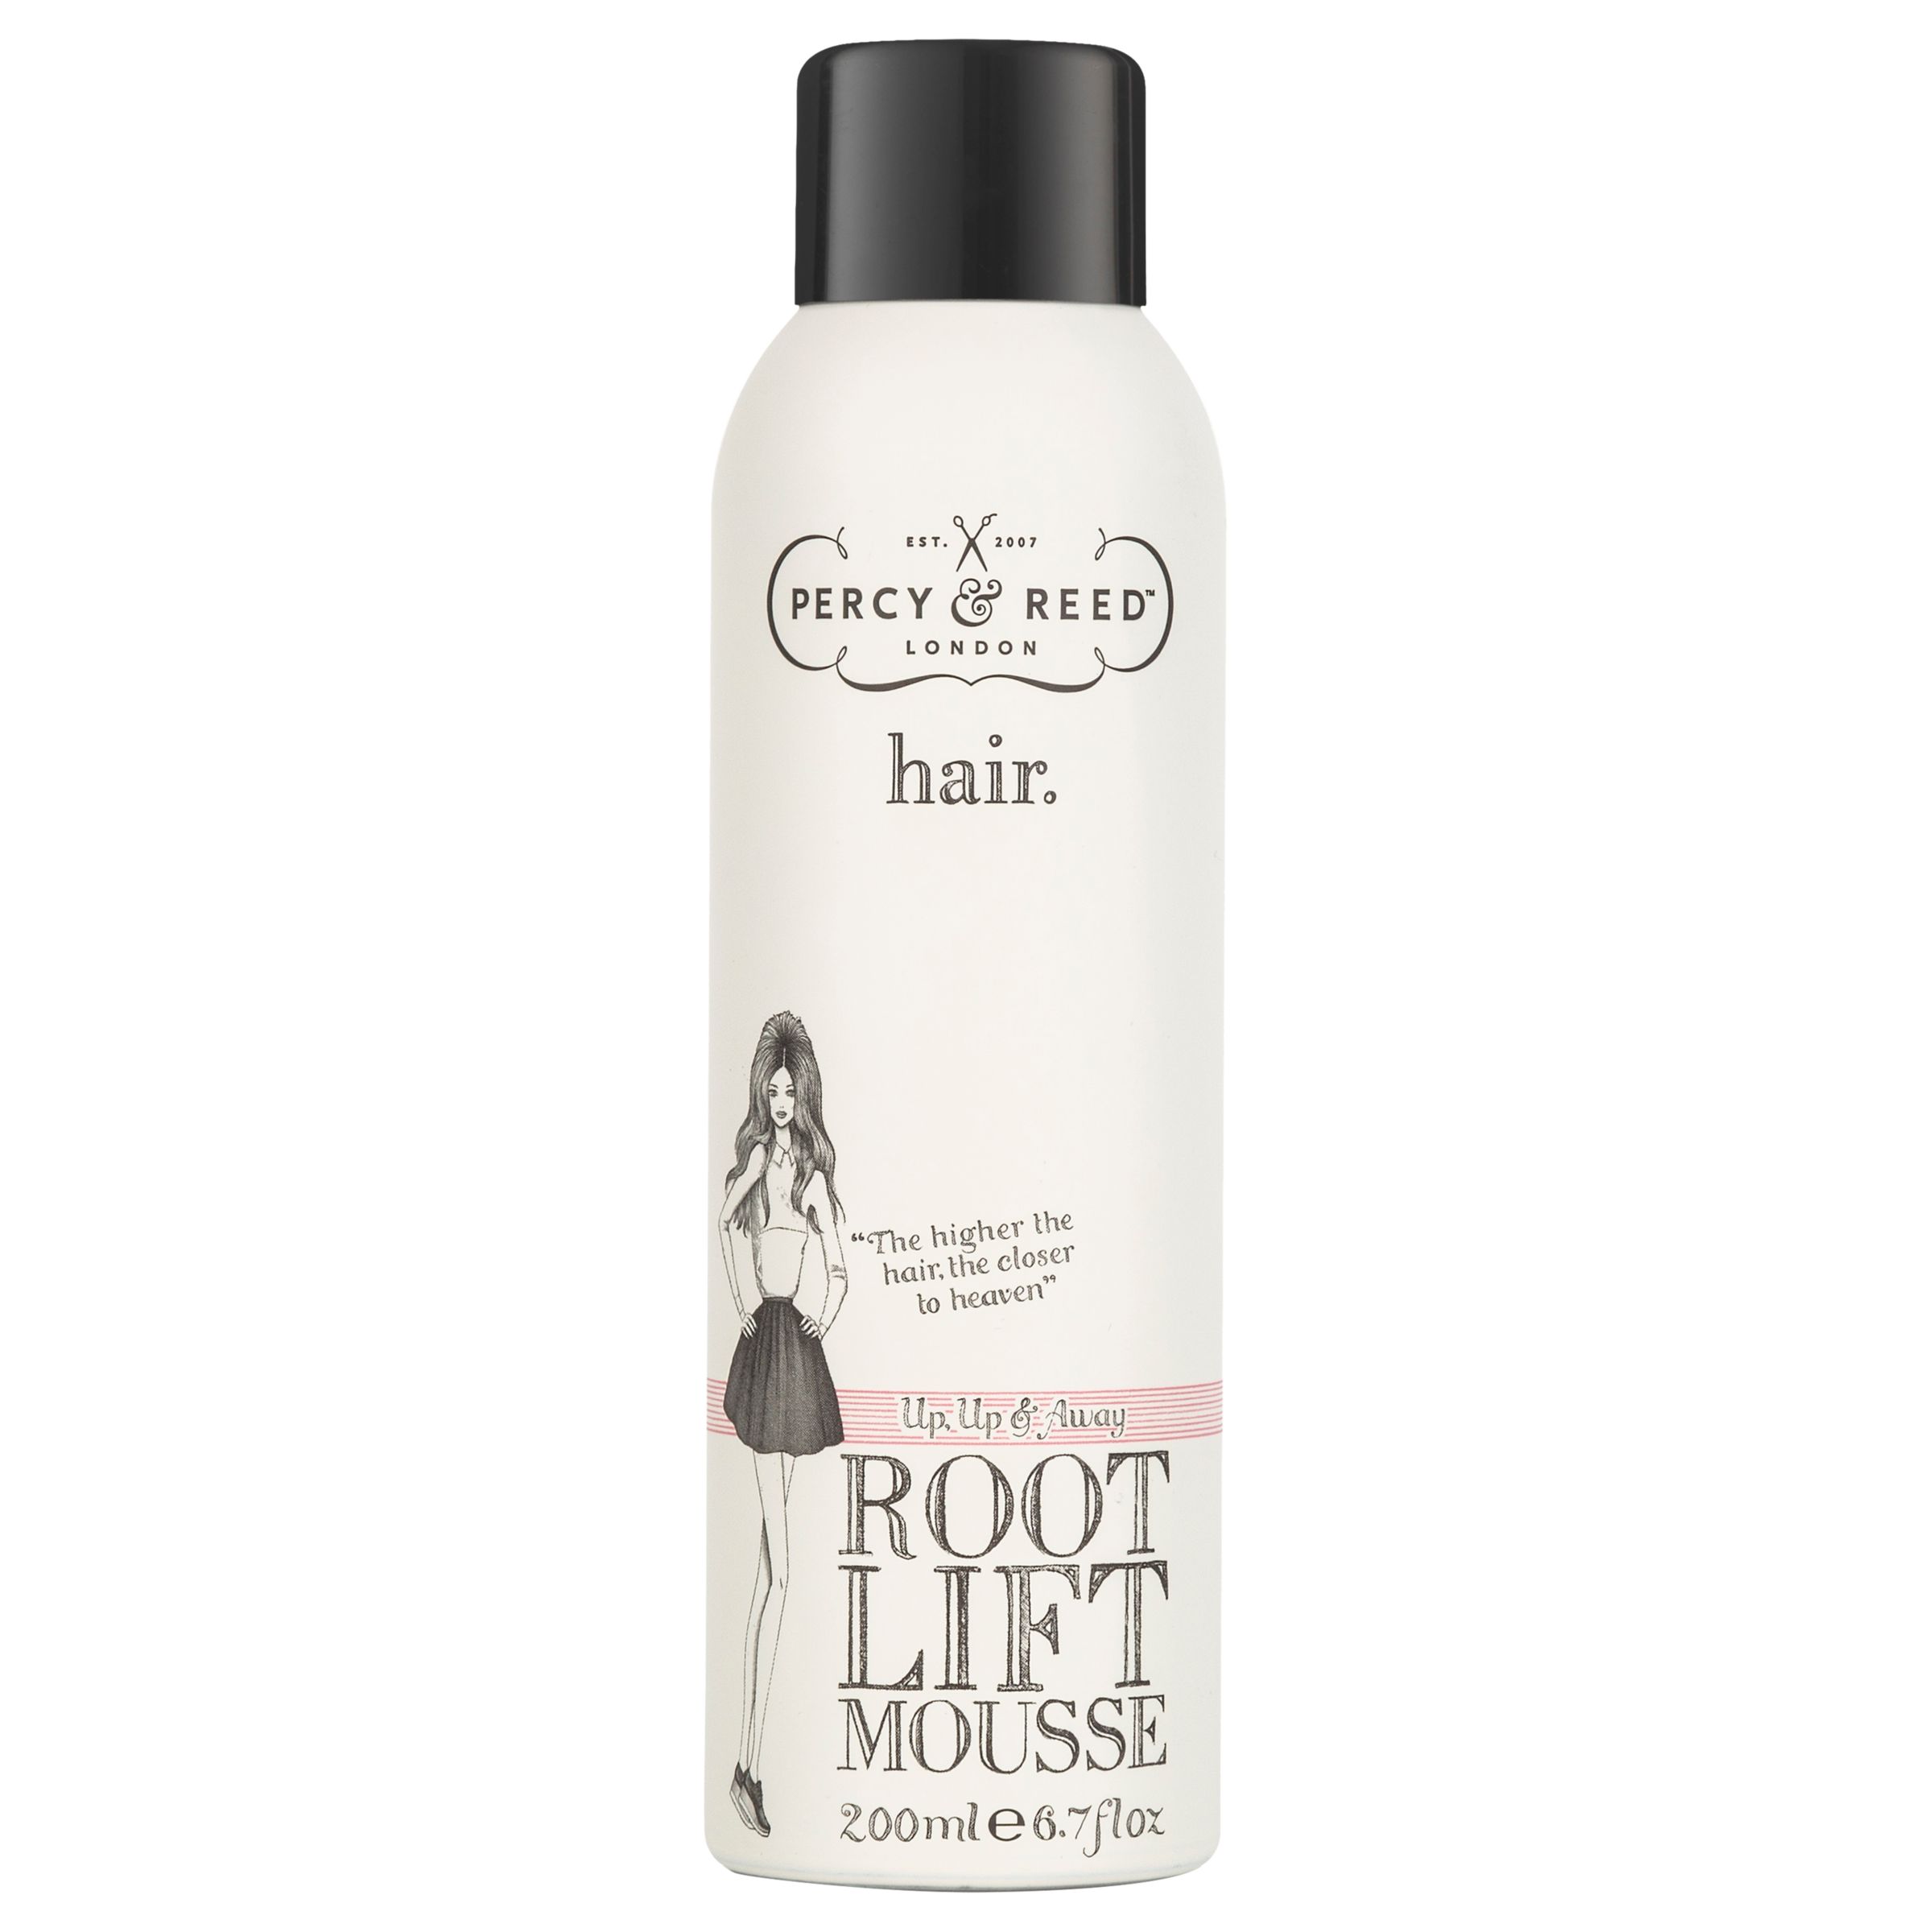 Percy & Reed Up, Up & Away Root Lift Mousse, 200ml